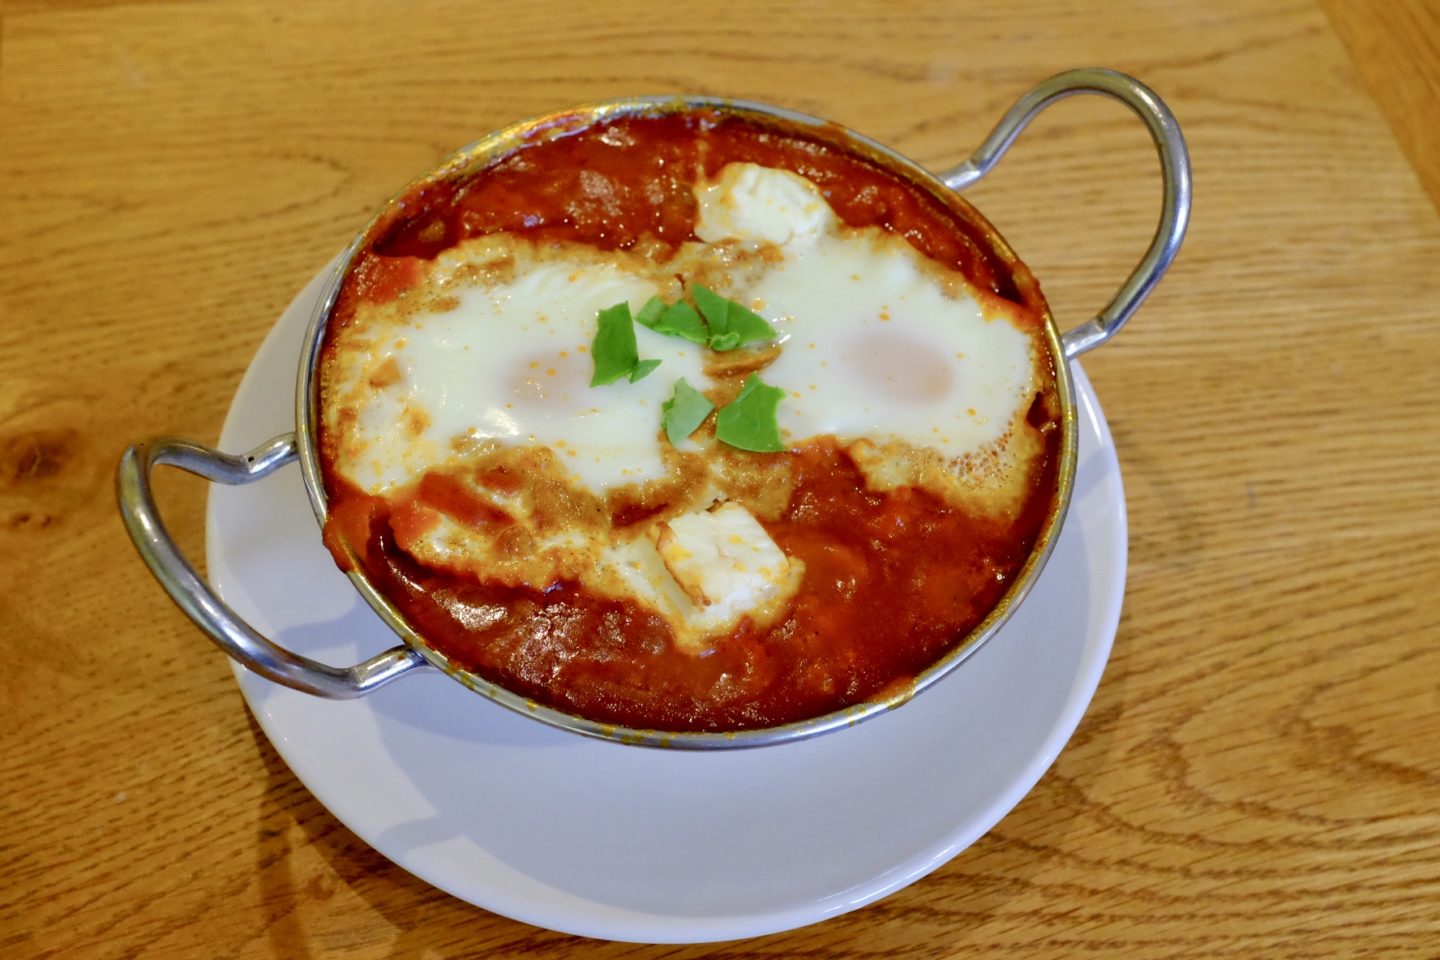 baked eggs served in a curry dish